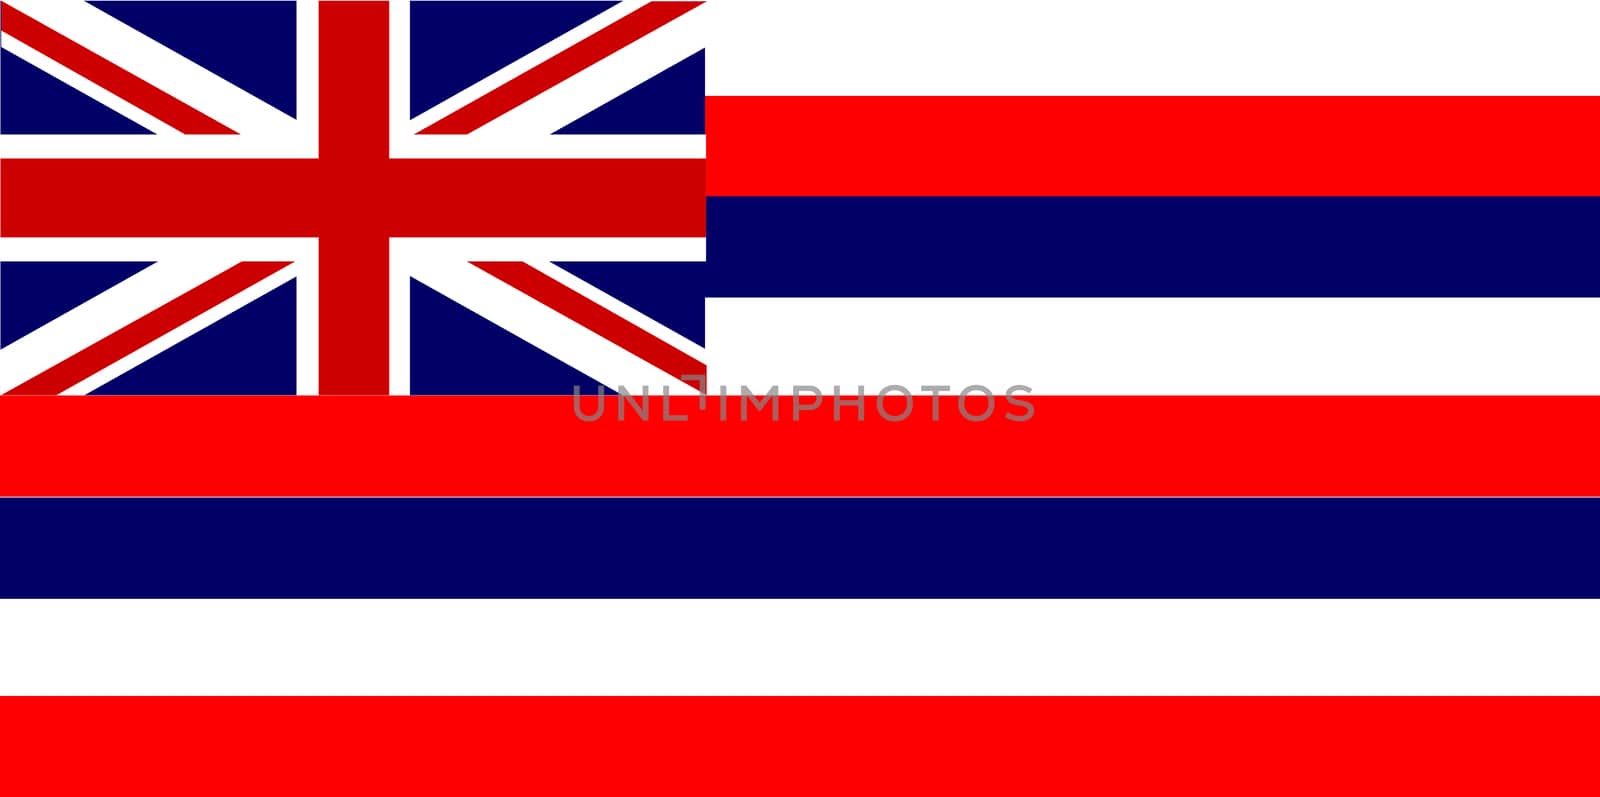 The flag of the United State state of Hawaii